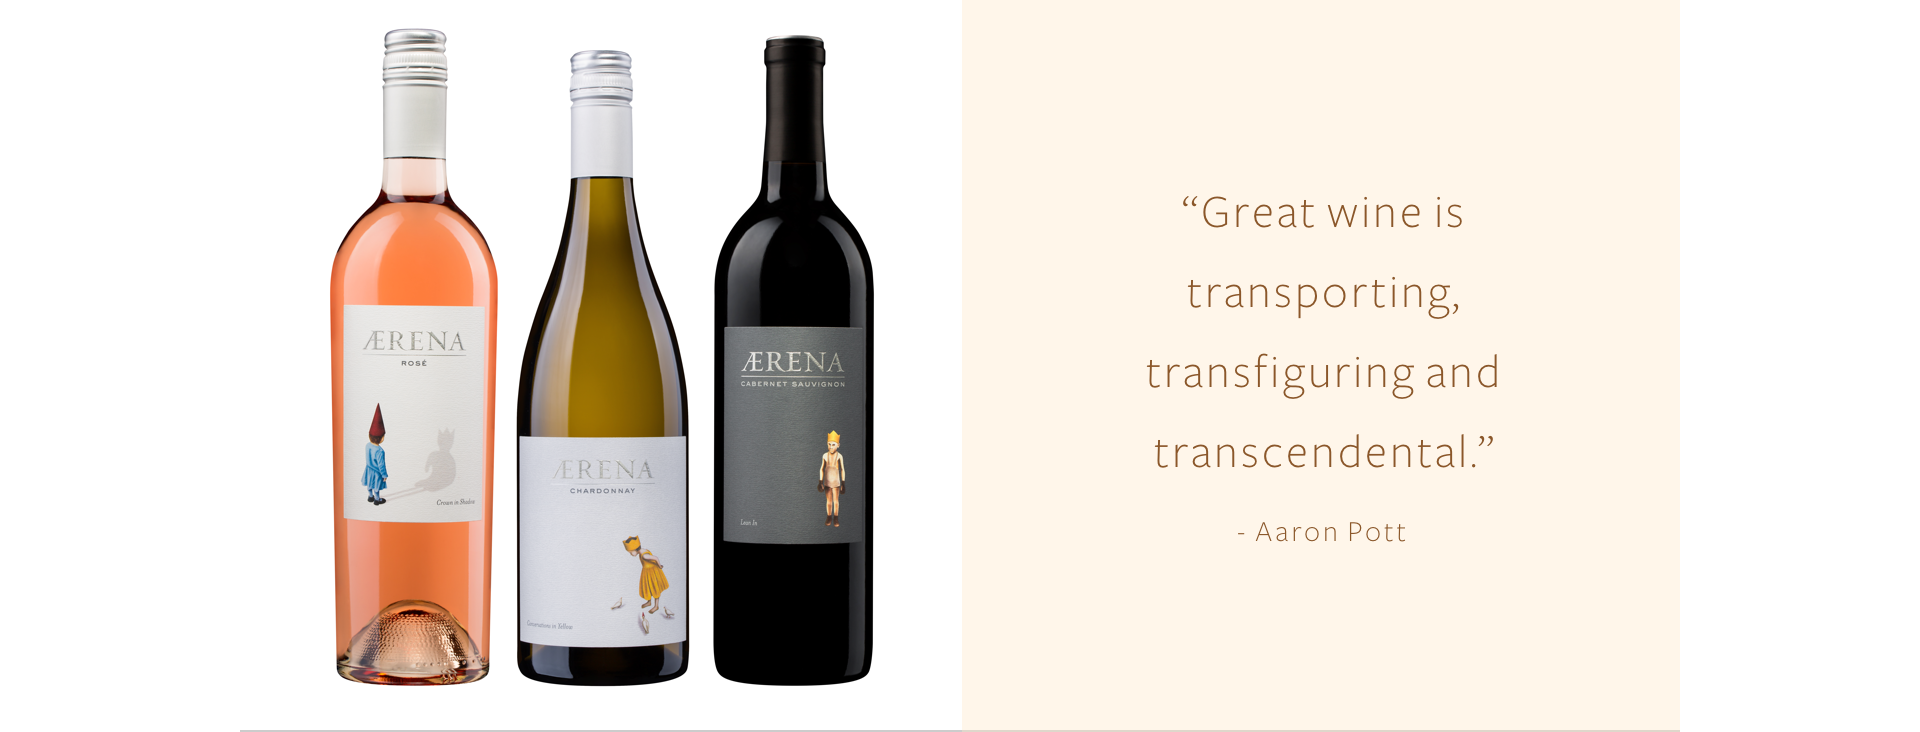 Wine bottles with quote: Great Wine is Transporting, transfiguring and transcendentals by Aaron Pott